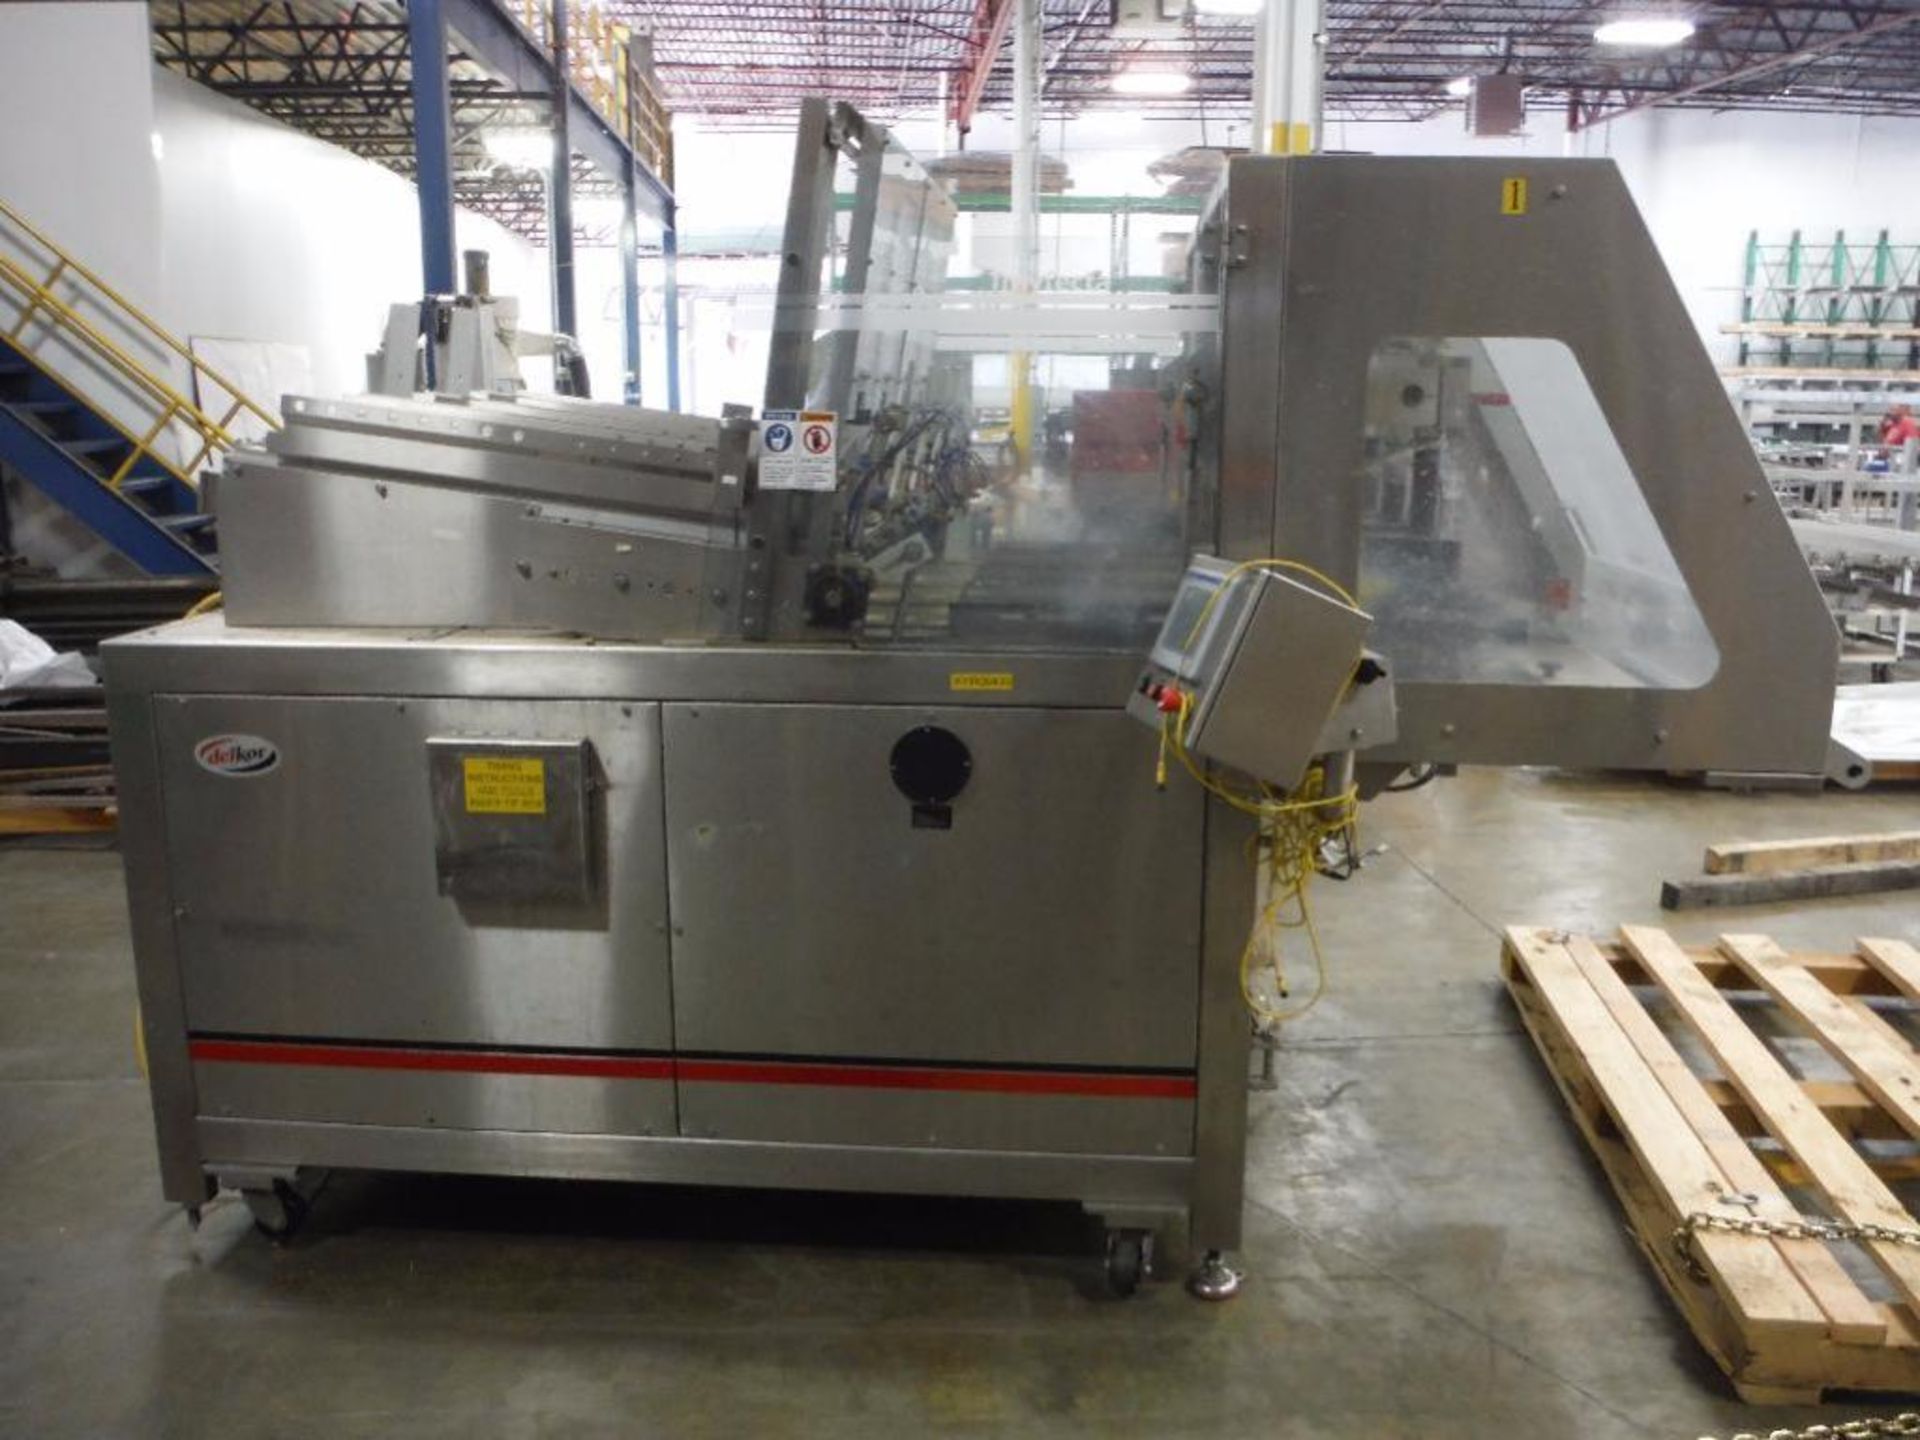 Delkor trayfecta 4 lane tray former, Model TF-1504SS, SN SP-2432, AB panelview plus 700, AB powerfle